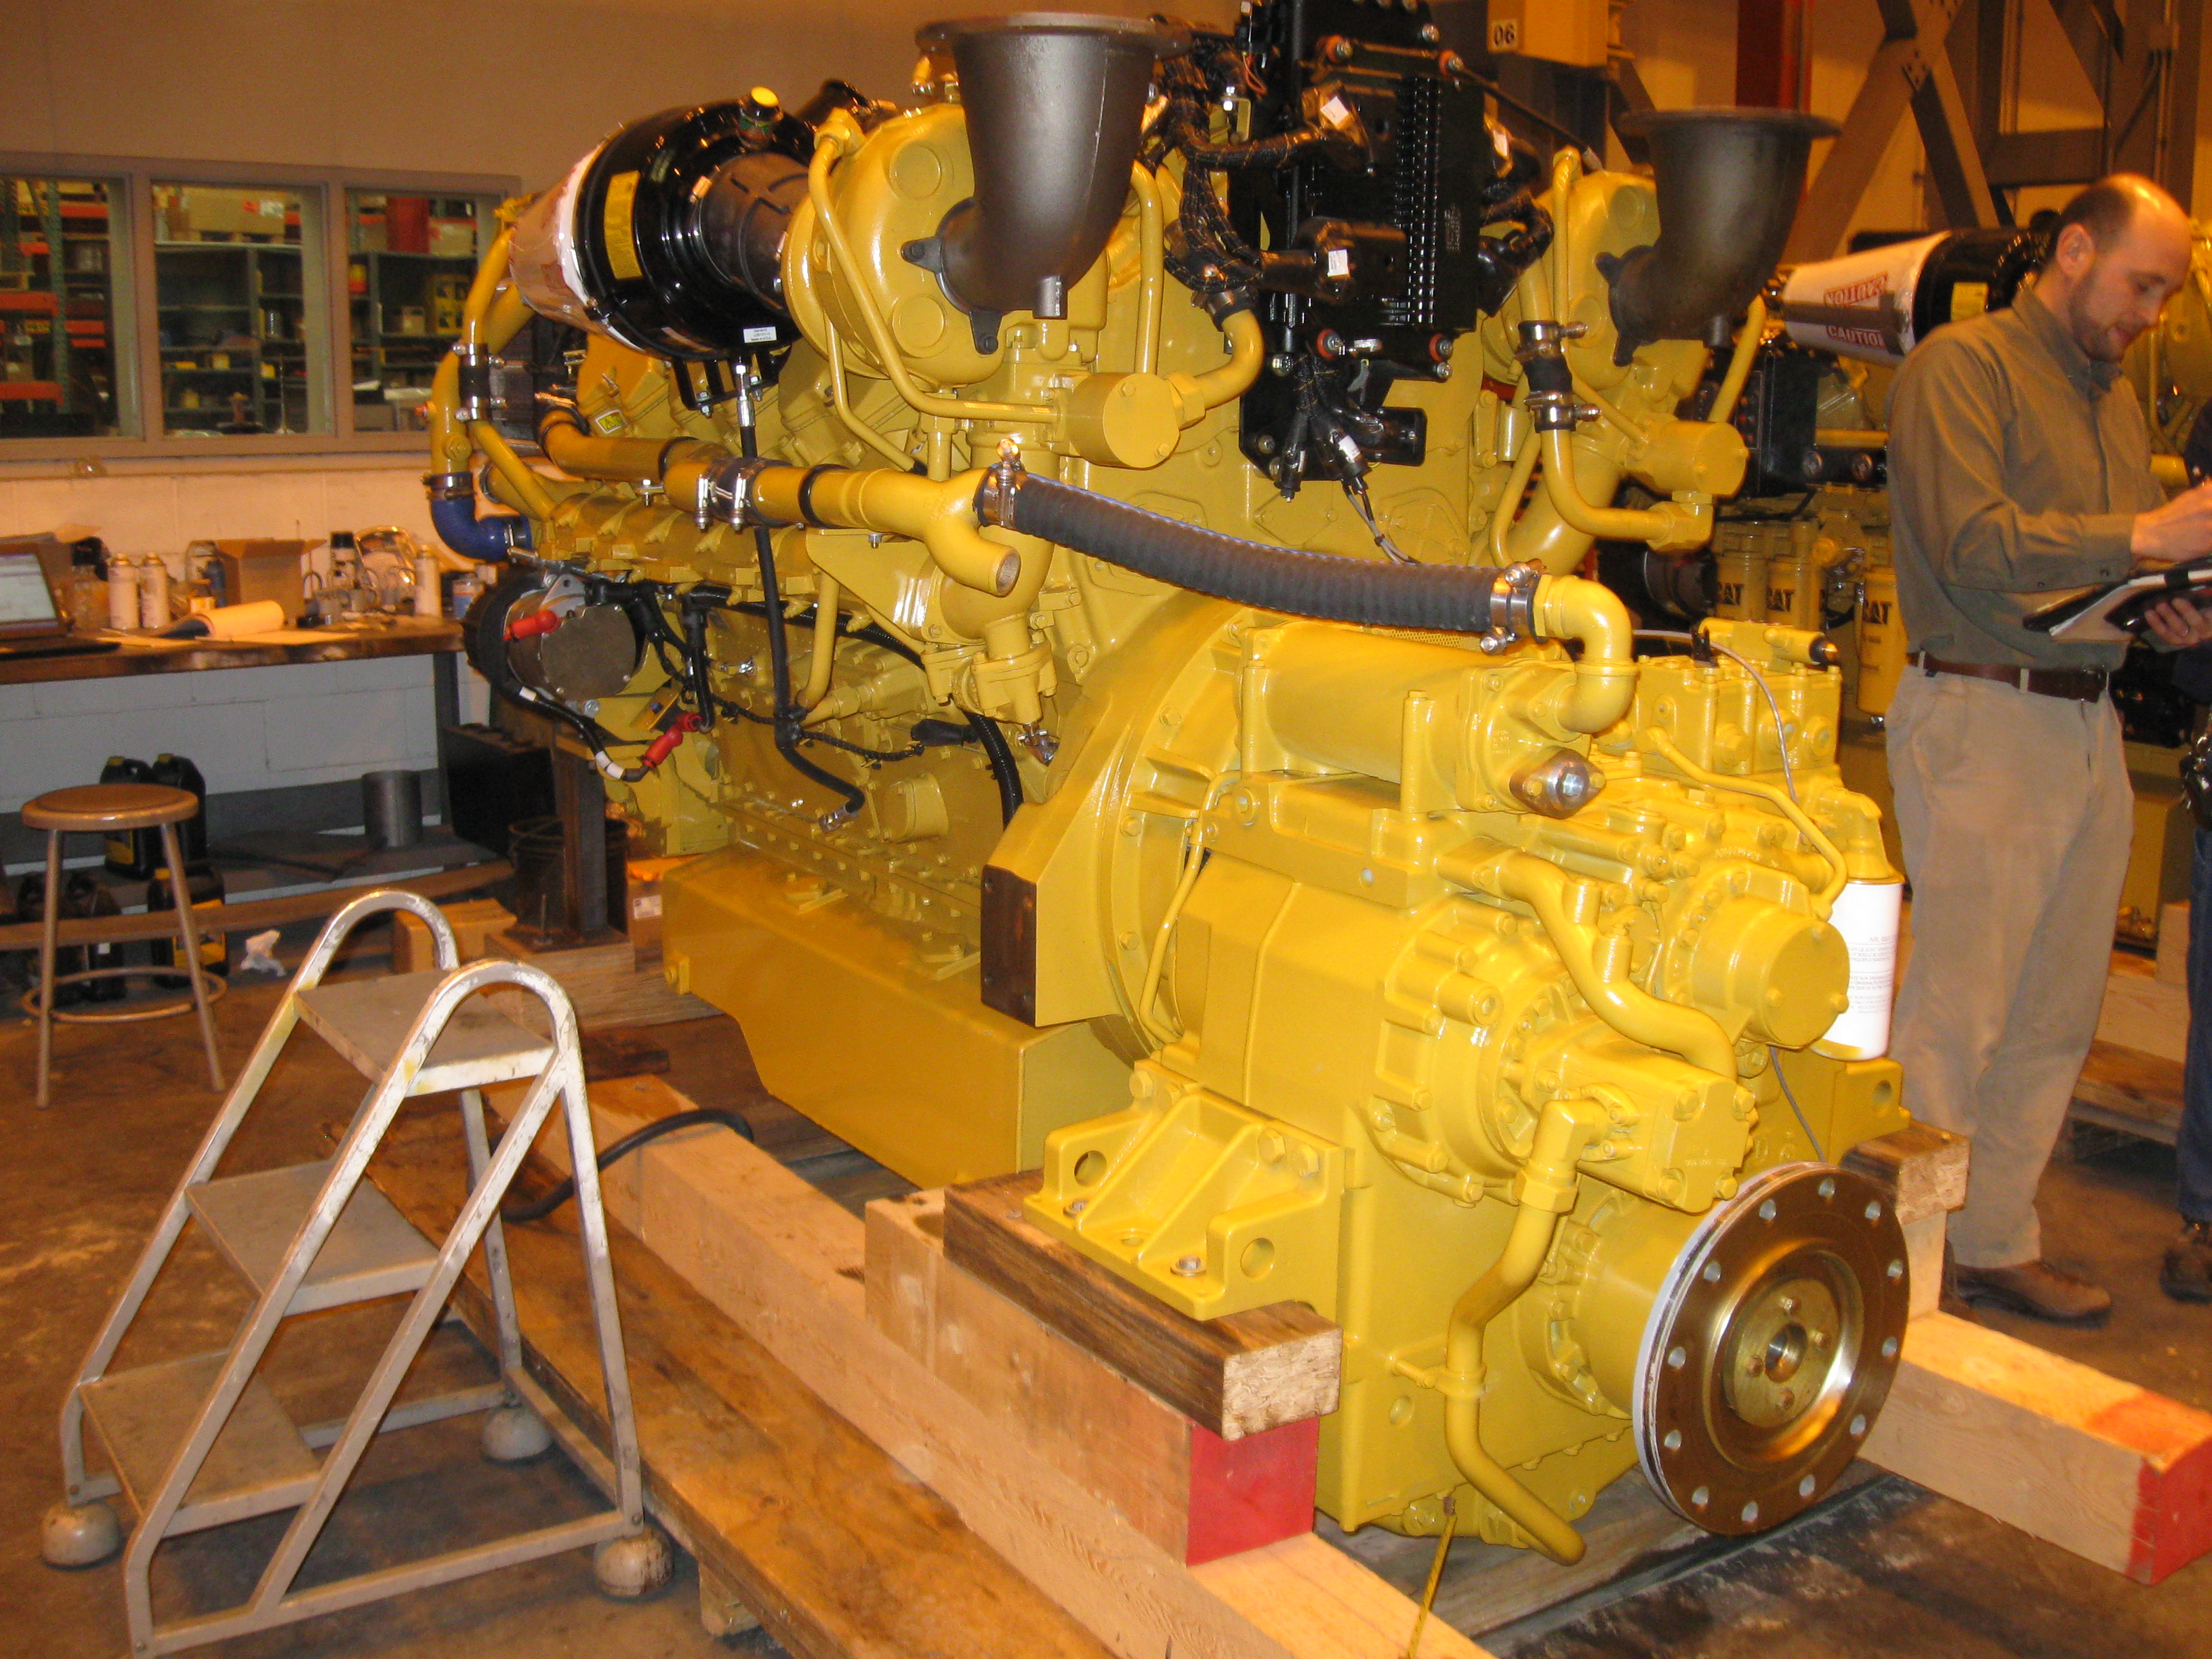 A new Cat engine is inspected prior to transport by Louis P. Cote, Inc.